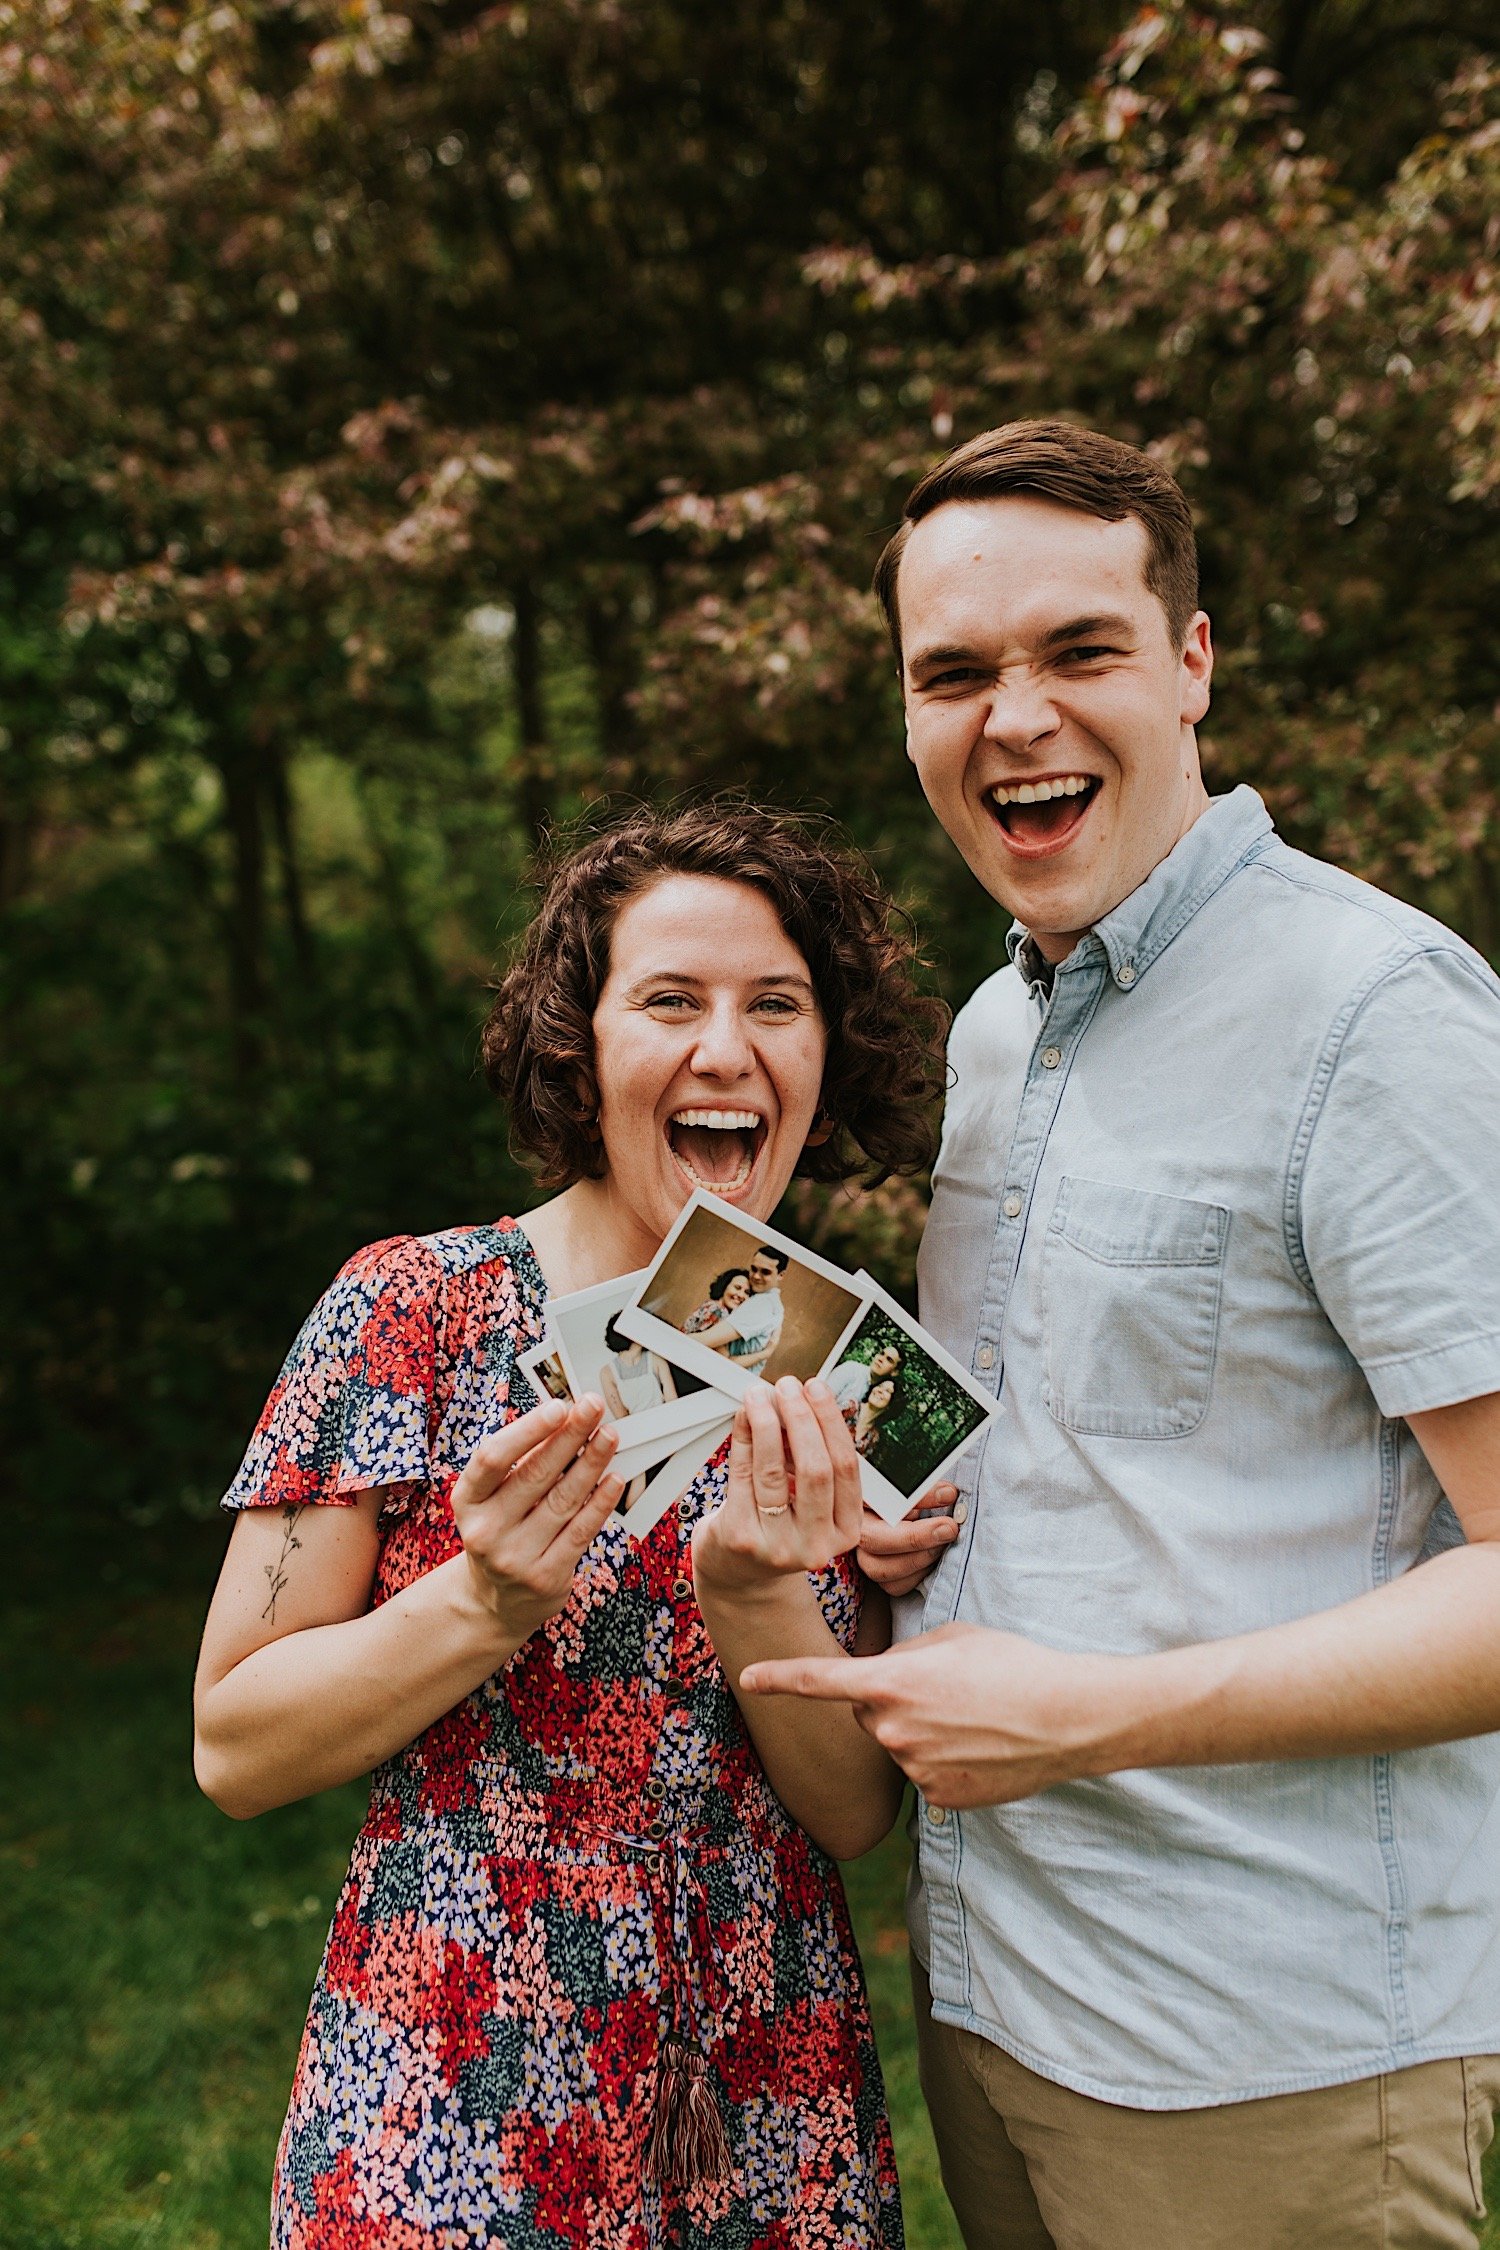 An engaged couple smiles at the camera while holding polaroid photos of themselves from their engagement session